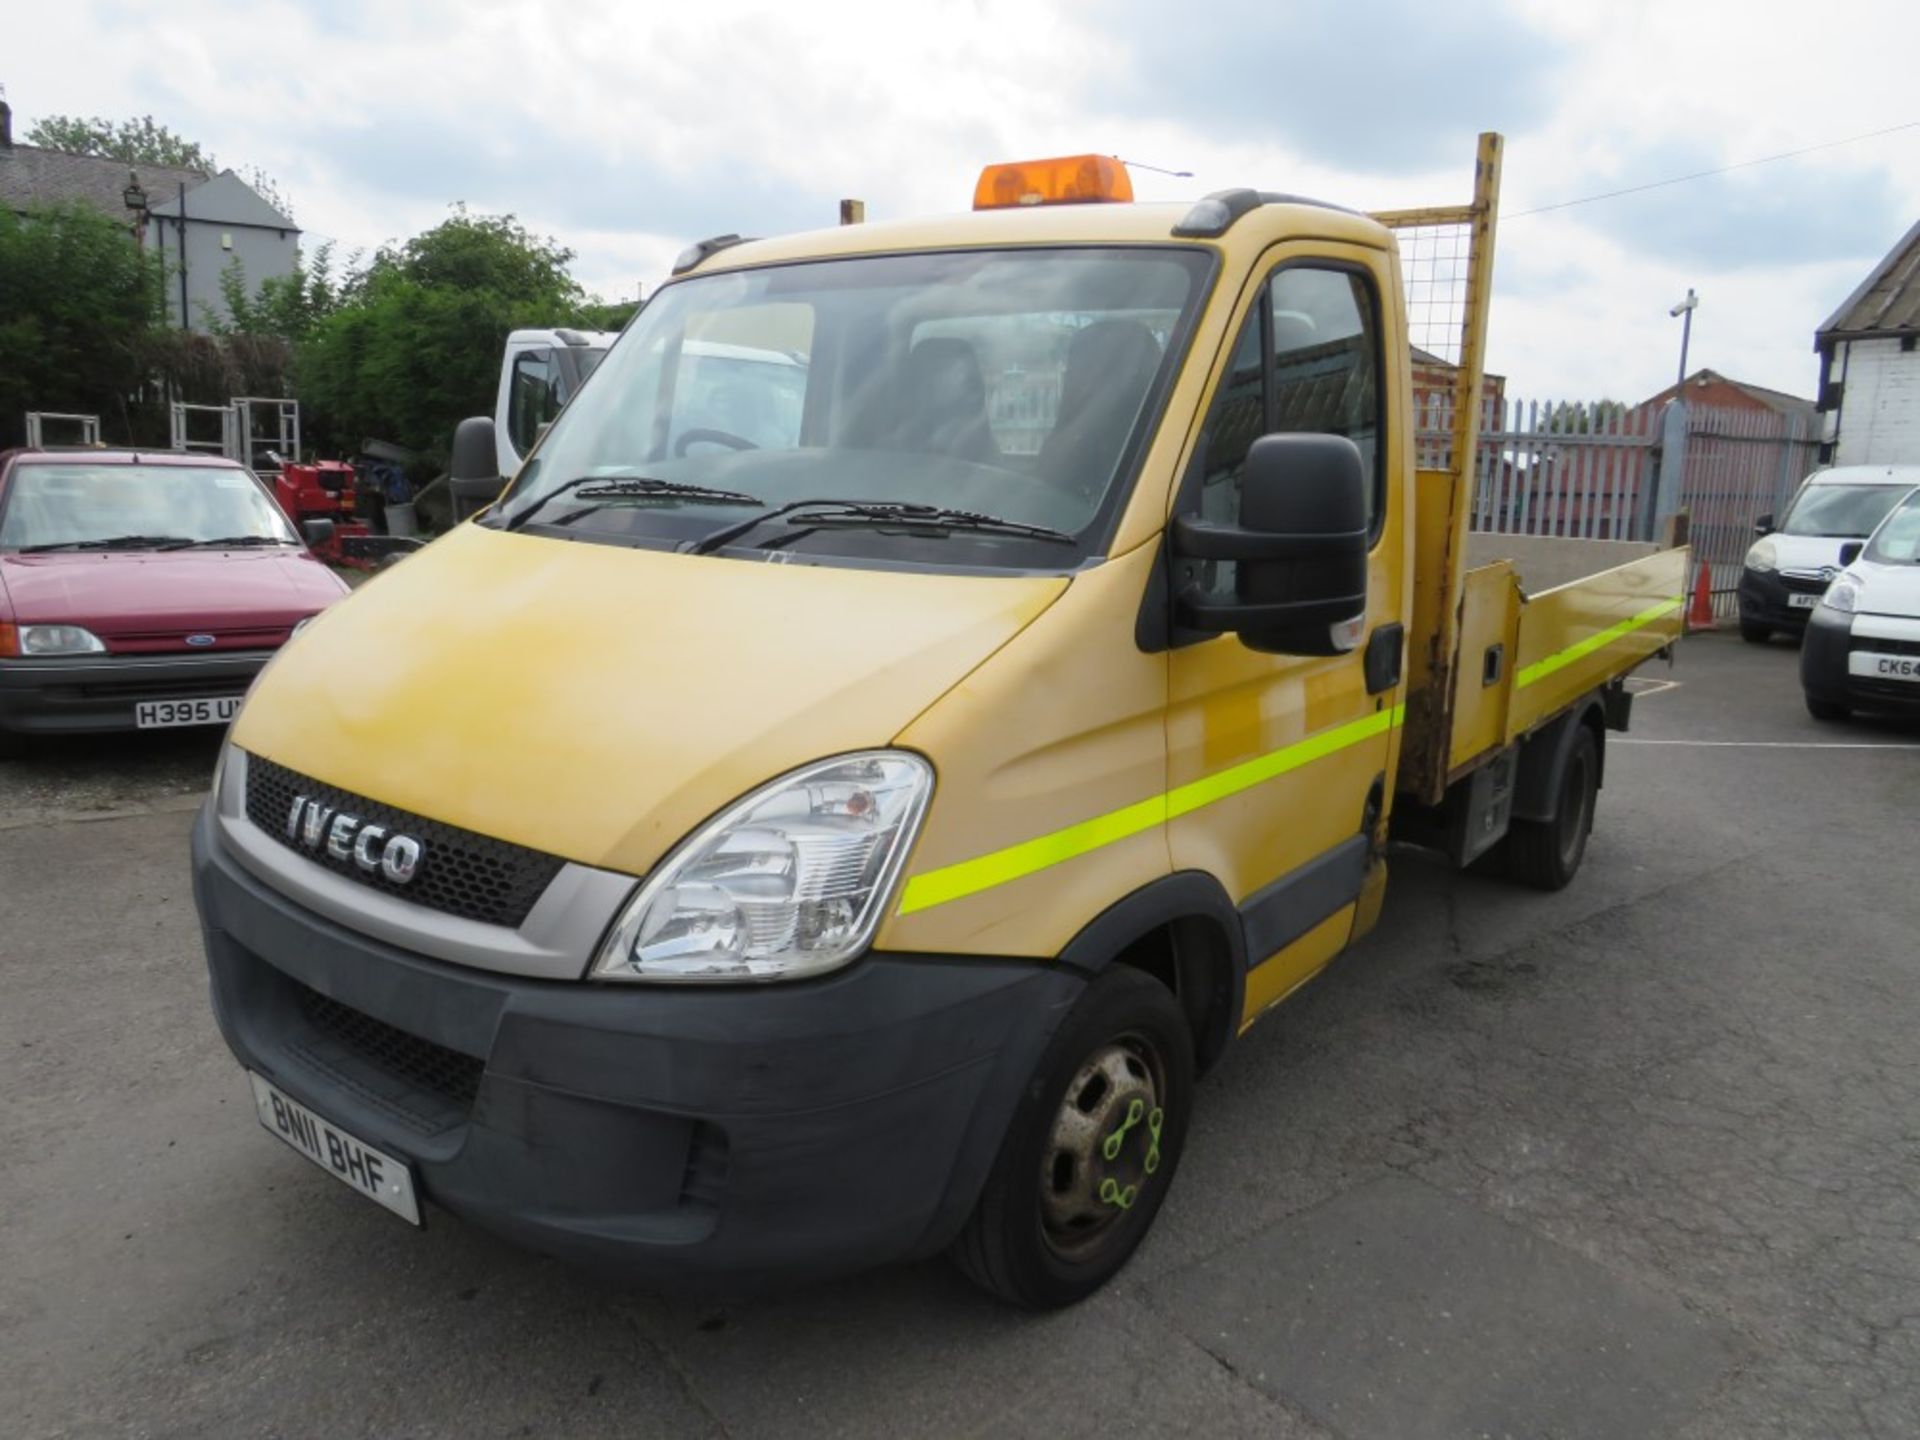 11 reg IVECO DAILY 35C13 MWB TIPPER (DIRECT COUNCIL) 1ST REG 03/11, TEST 03/22, 88503M, V5 HERE, 1 - Image 2 of 6